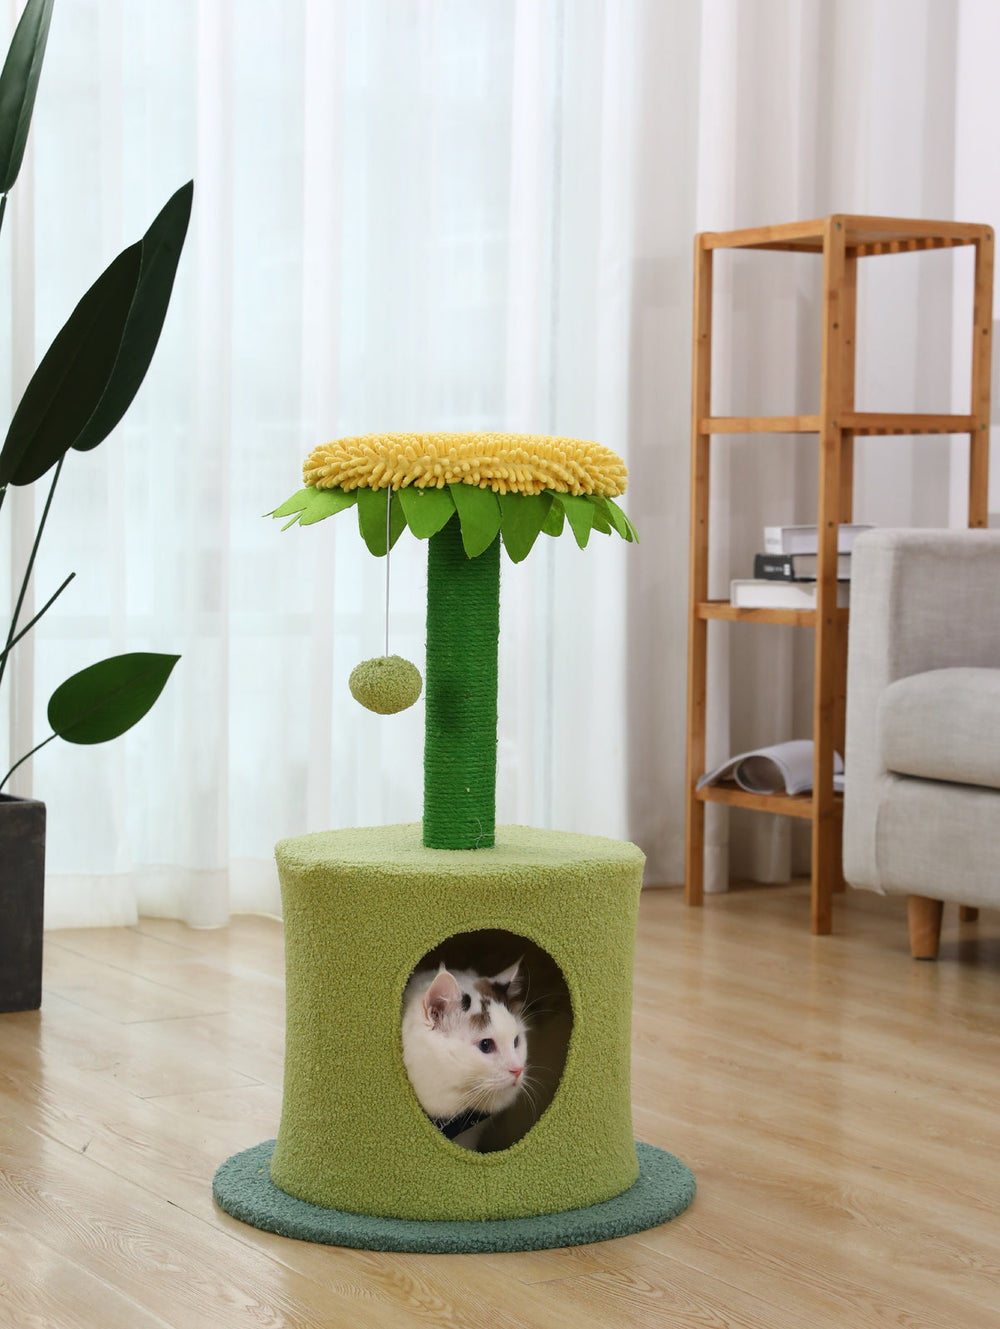 Furbulous 70cm Sunflower Cat Tree scratching Post and Cat Tower with Hideaway